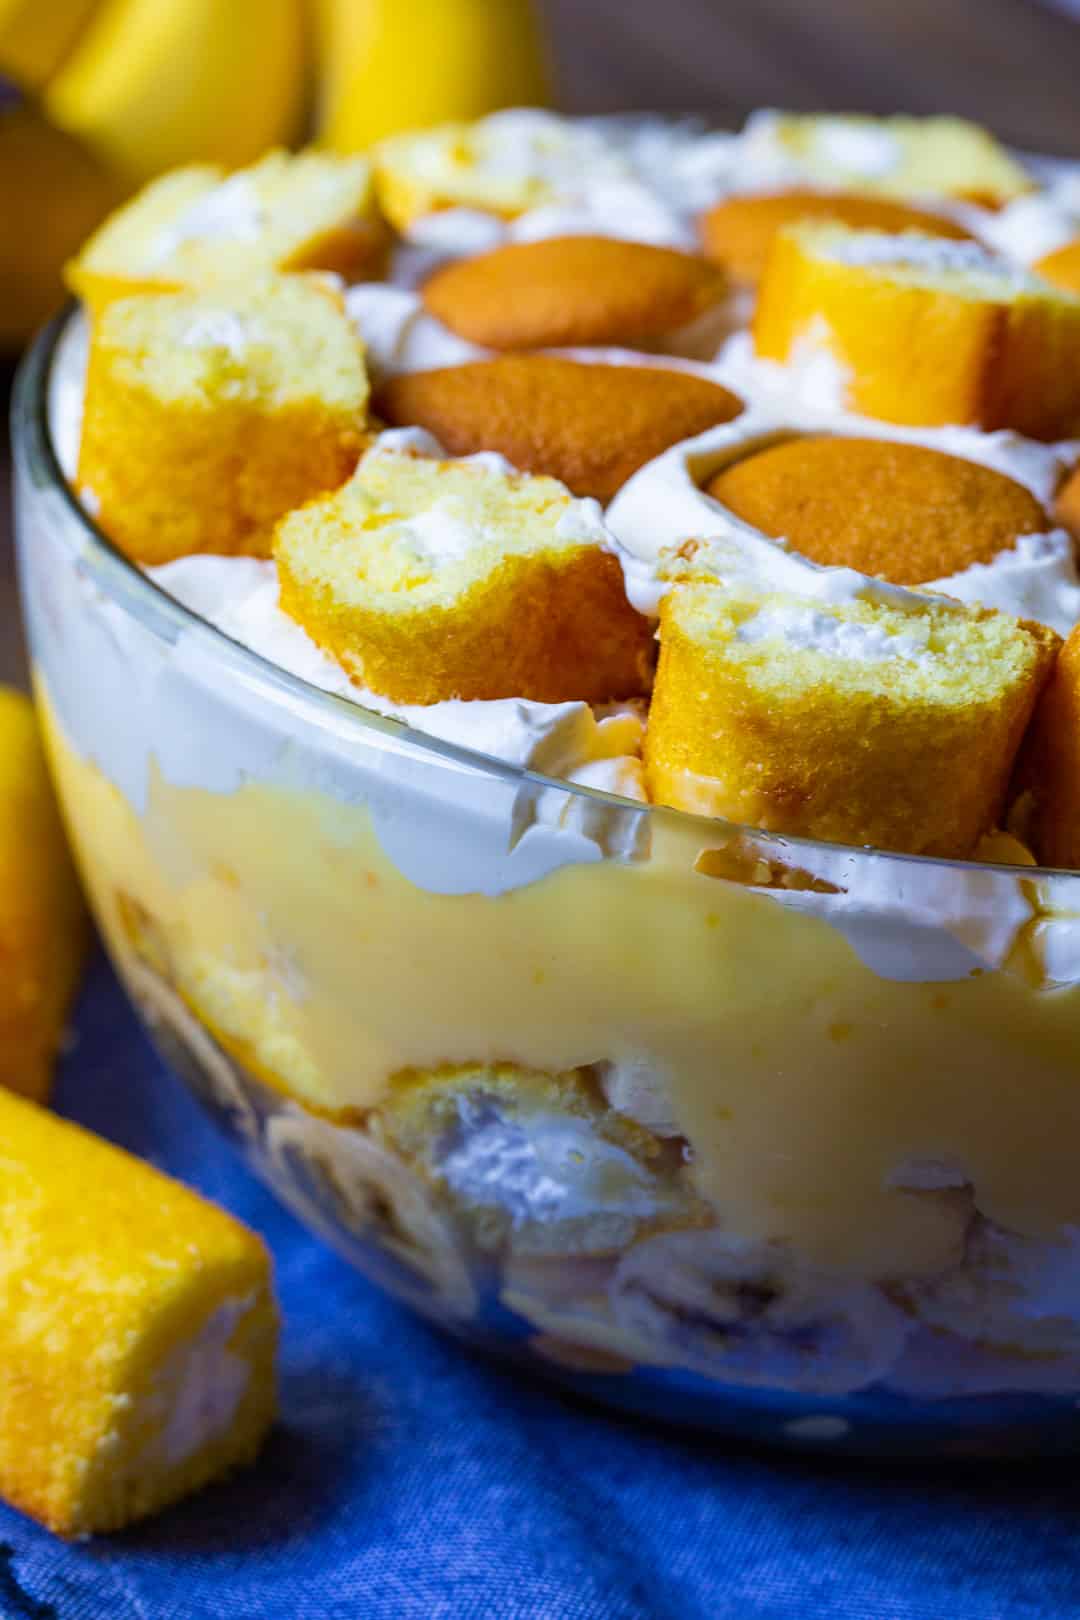 Side view of banana pudding in glass bowl.